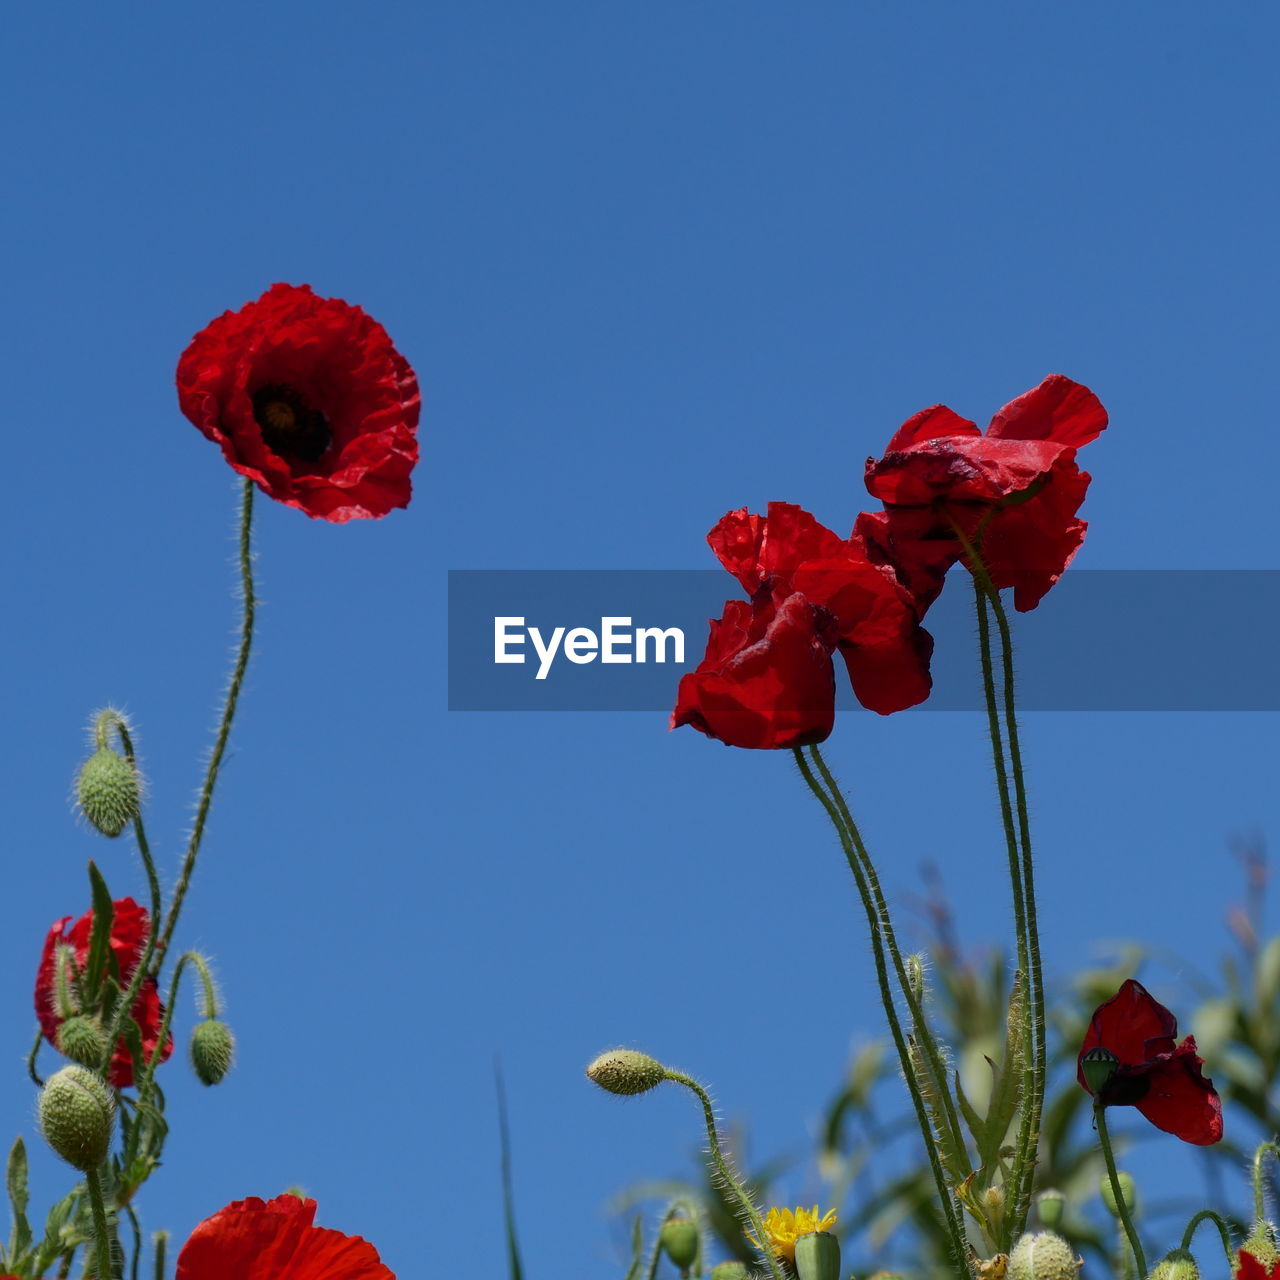 LOW ANGLE VIEW OF RED FLOWERING PLANT AGAINST BLUE SKY